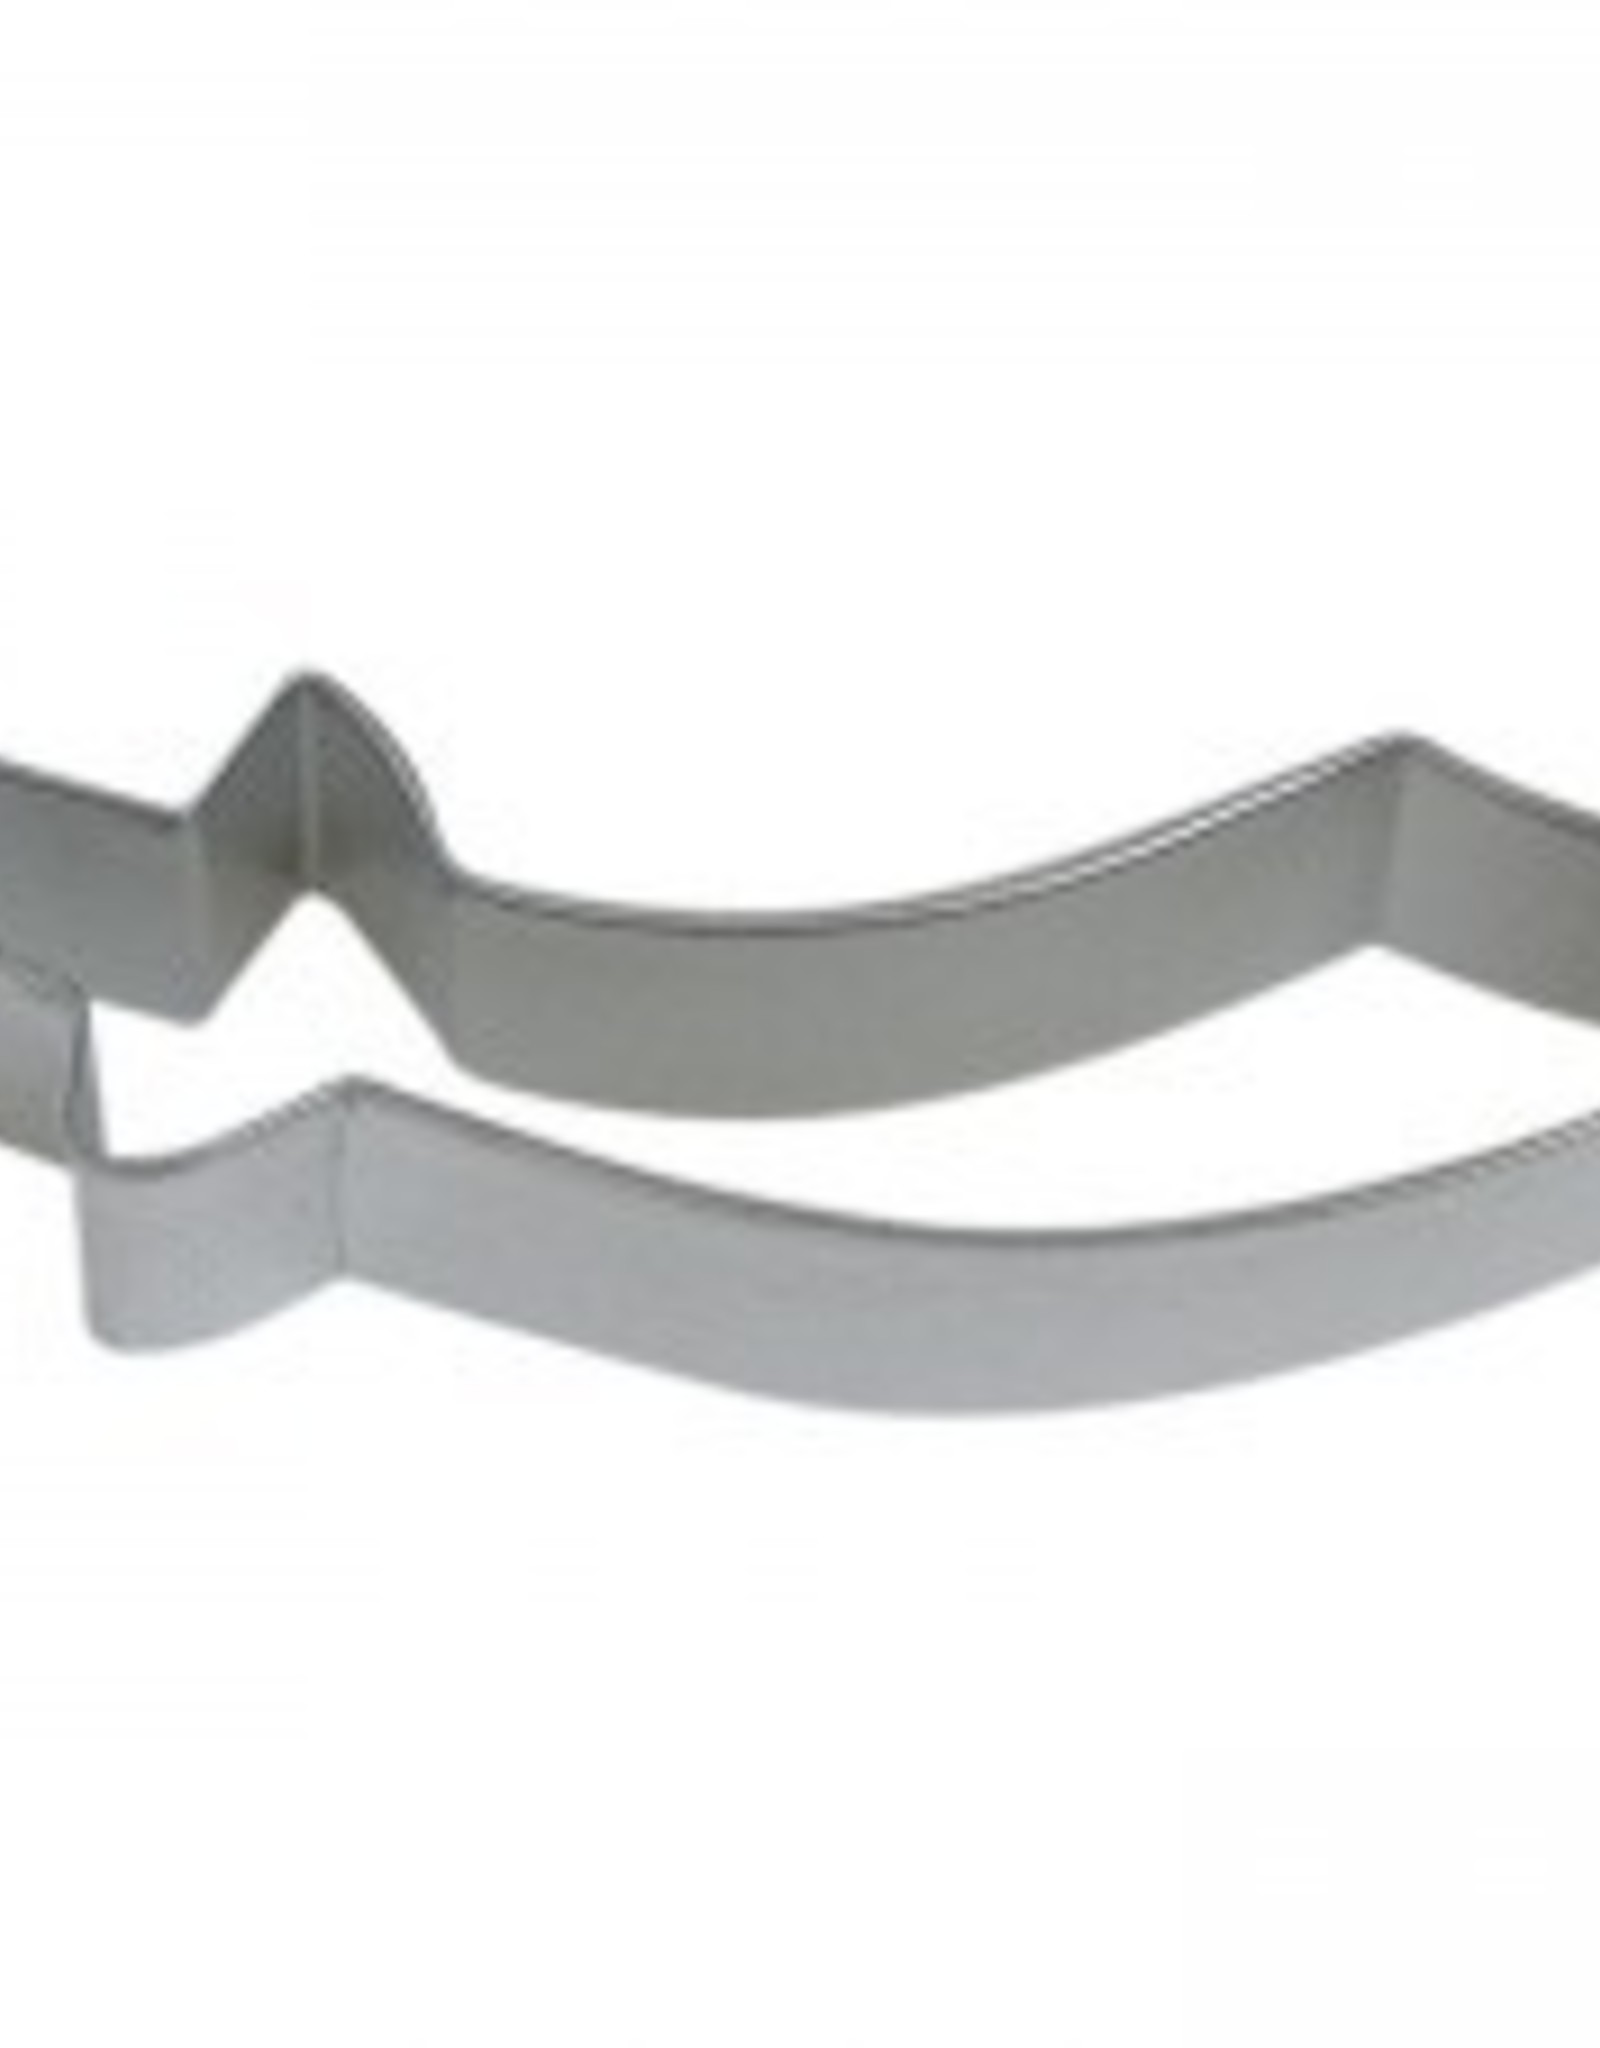 R and M Sword Cookie Cutter (5")